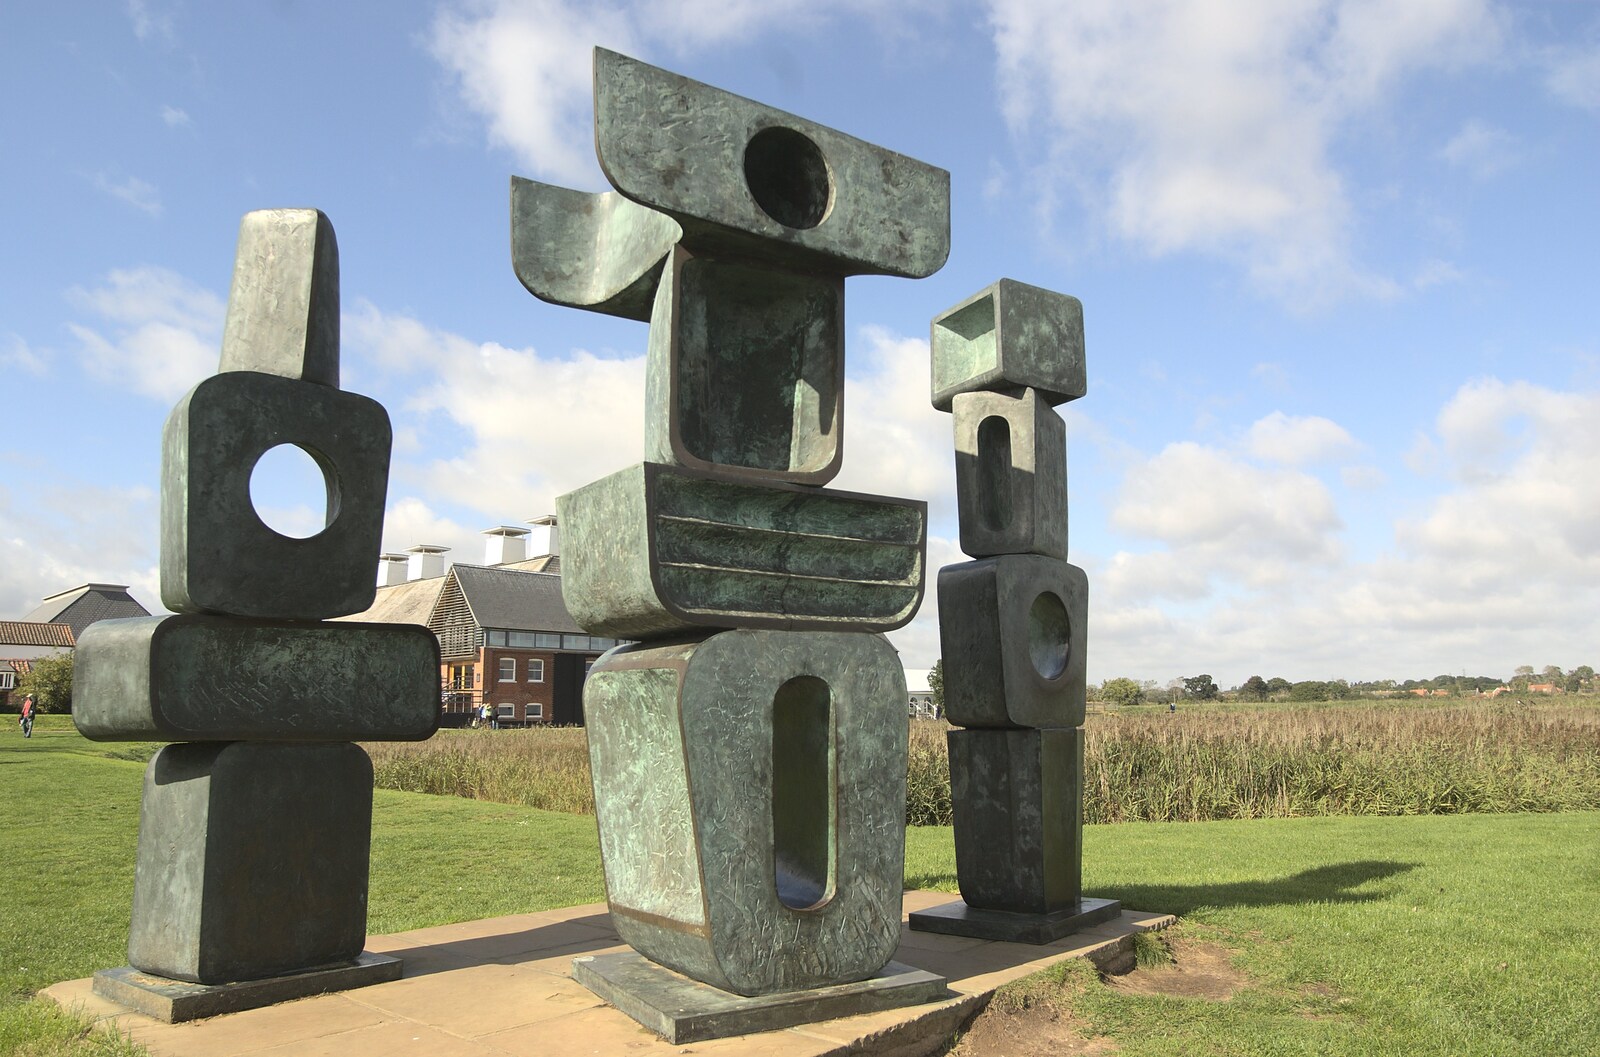 The Aldeburgh Food Festival, Snape Maltings, Suffolk - 25th September 2010: The Barbara Hepworth 'Family of Man'